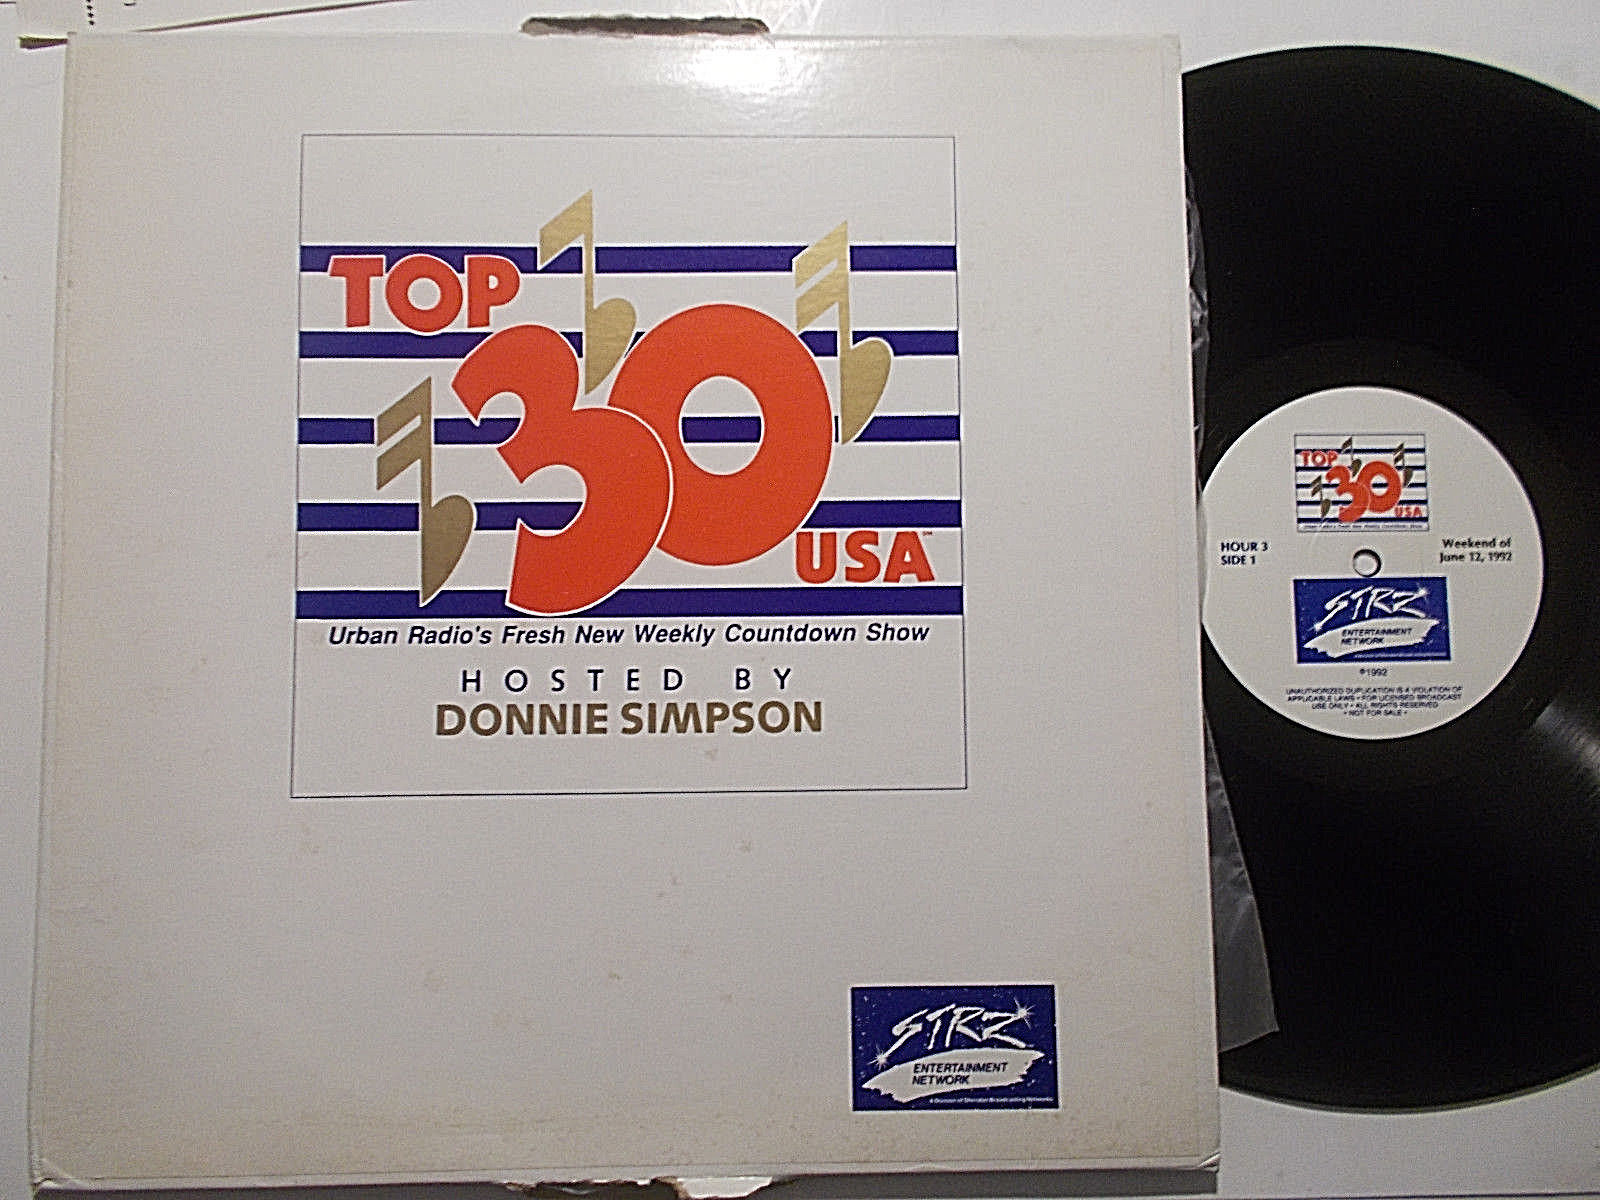 popsike.com - TOP 30 URBAN RADIO Donnie Simpson host, Radio Station Play  Only 3 LP's NEAR MINT - auction details